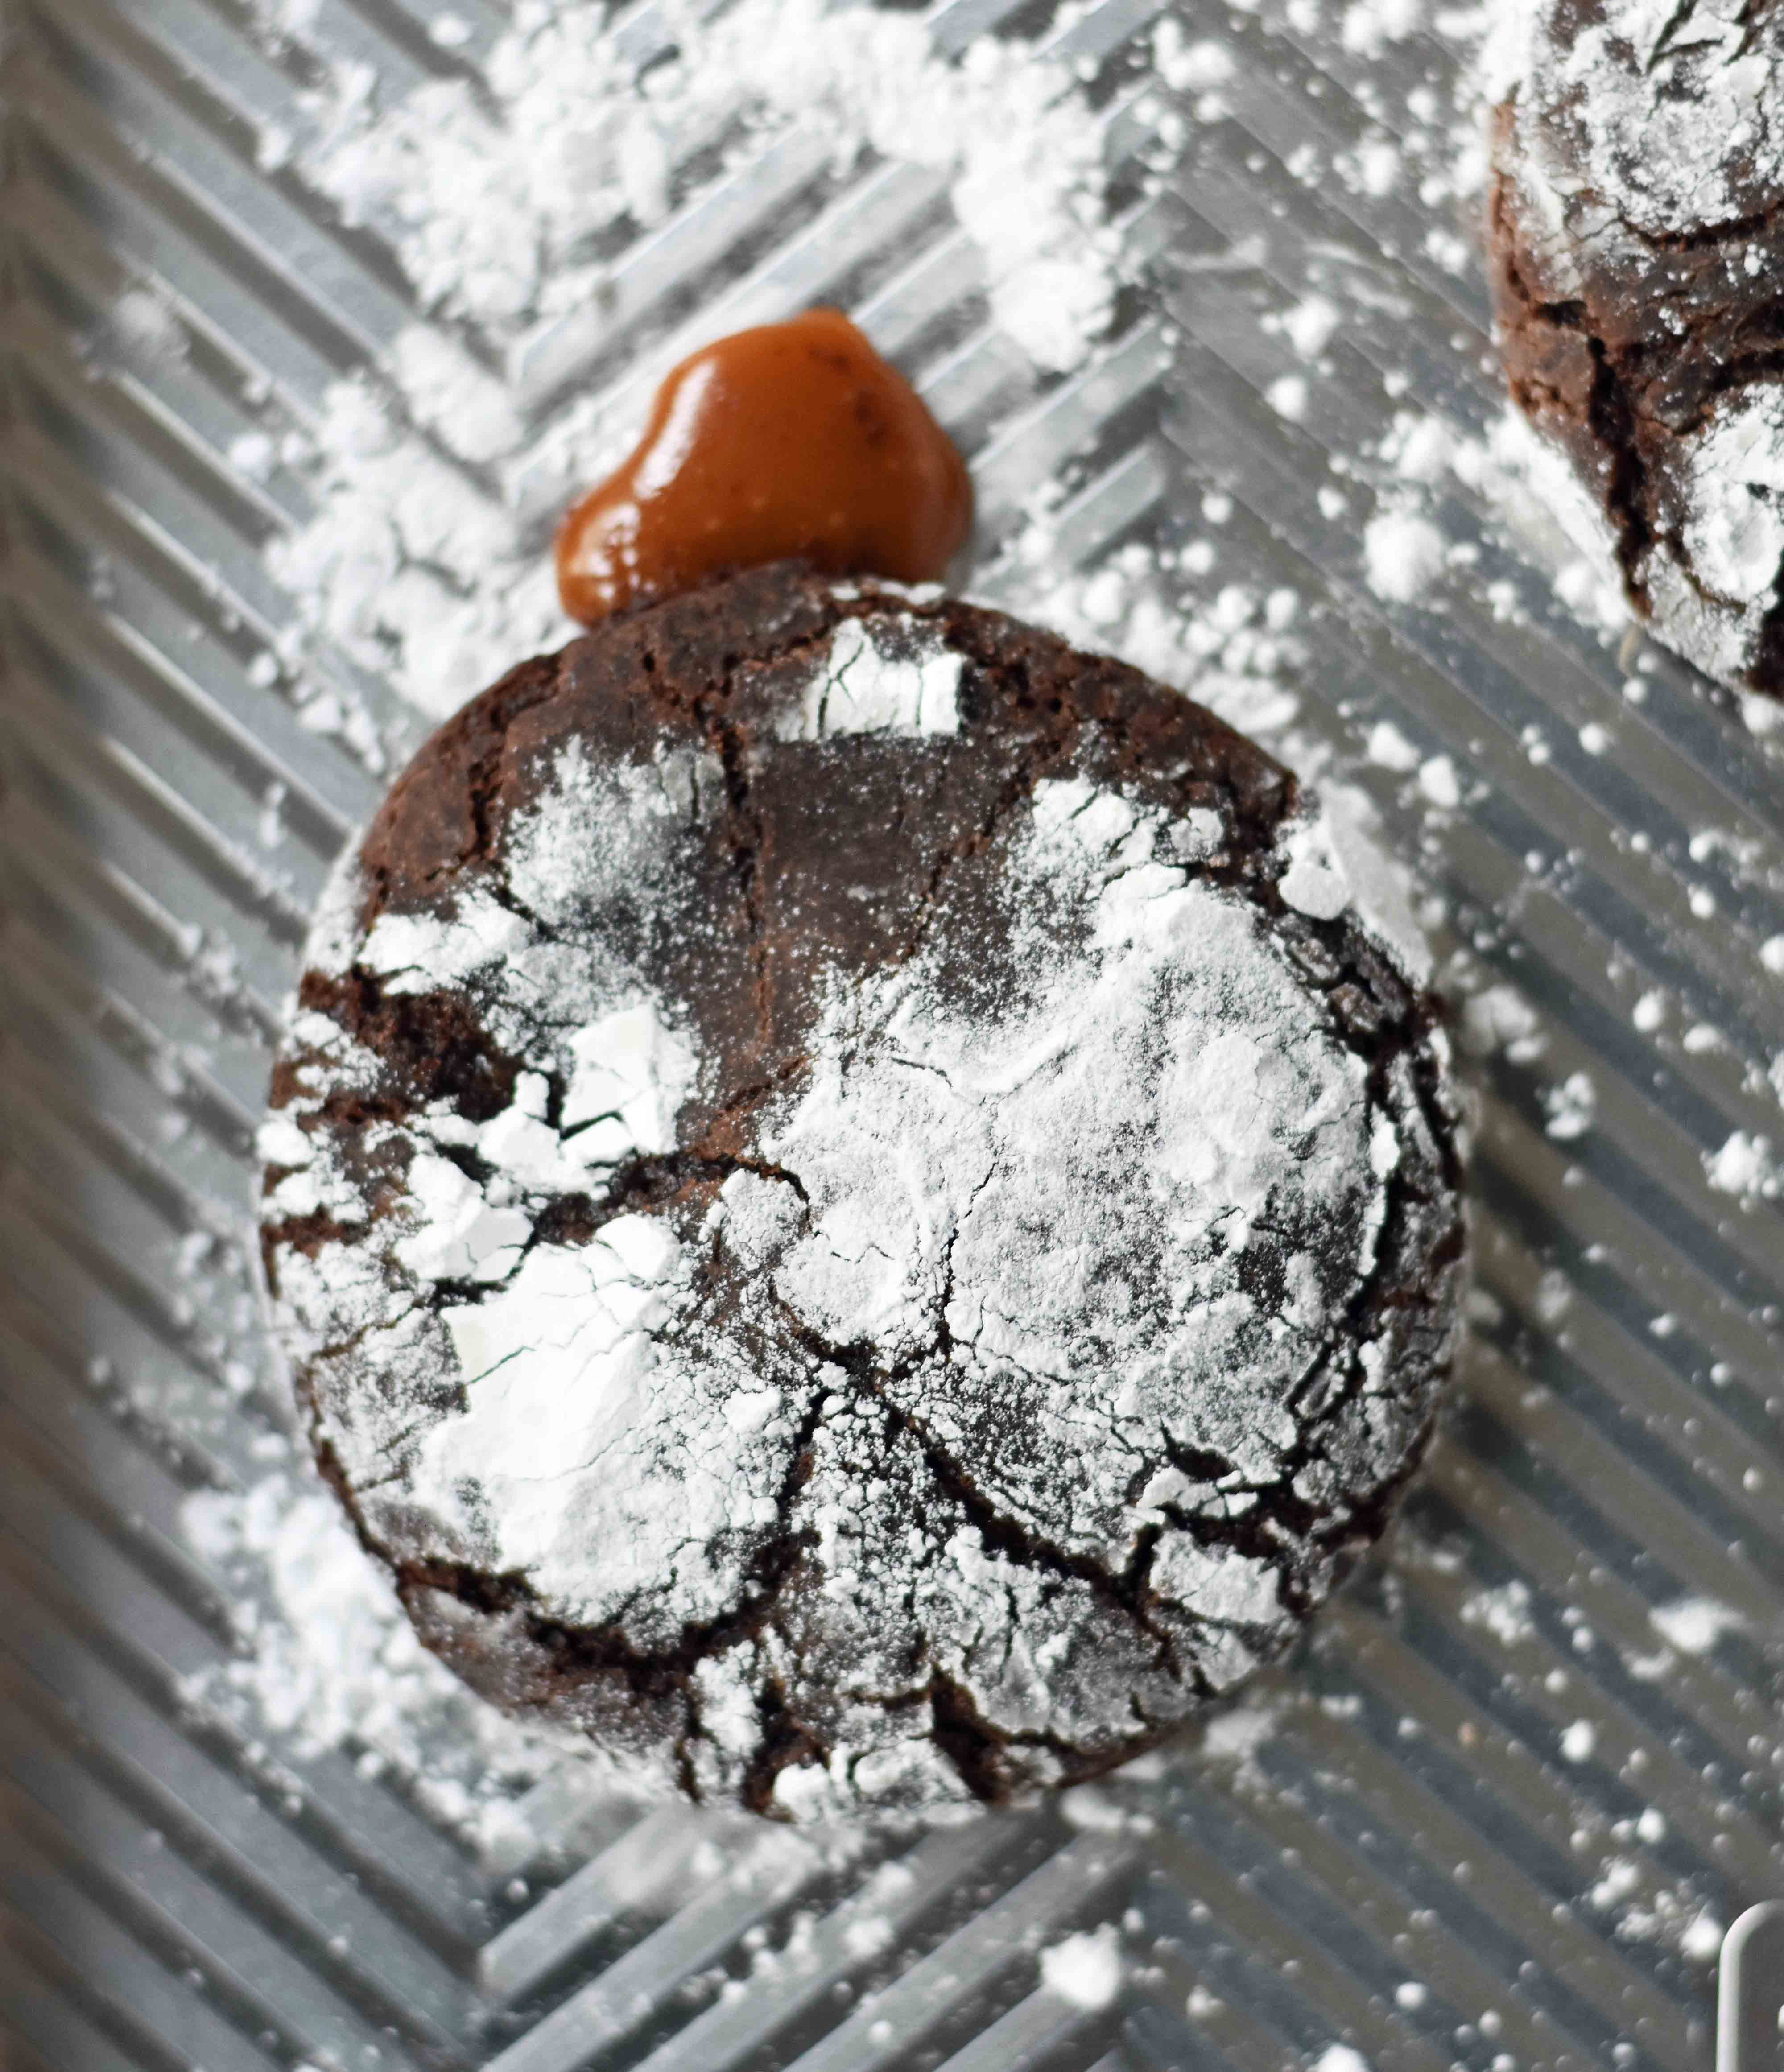 Caramel Filled Chocolate Crinkle Cookies. Soft chewy chocolate cookies with soft caramel center and roll into powdered sugar. A popular chocolate caramel filled cookie. www.modernhoney.com